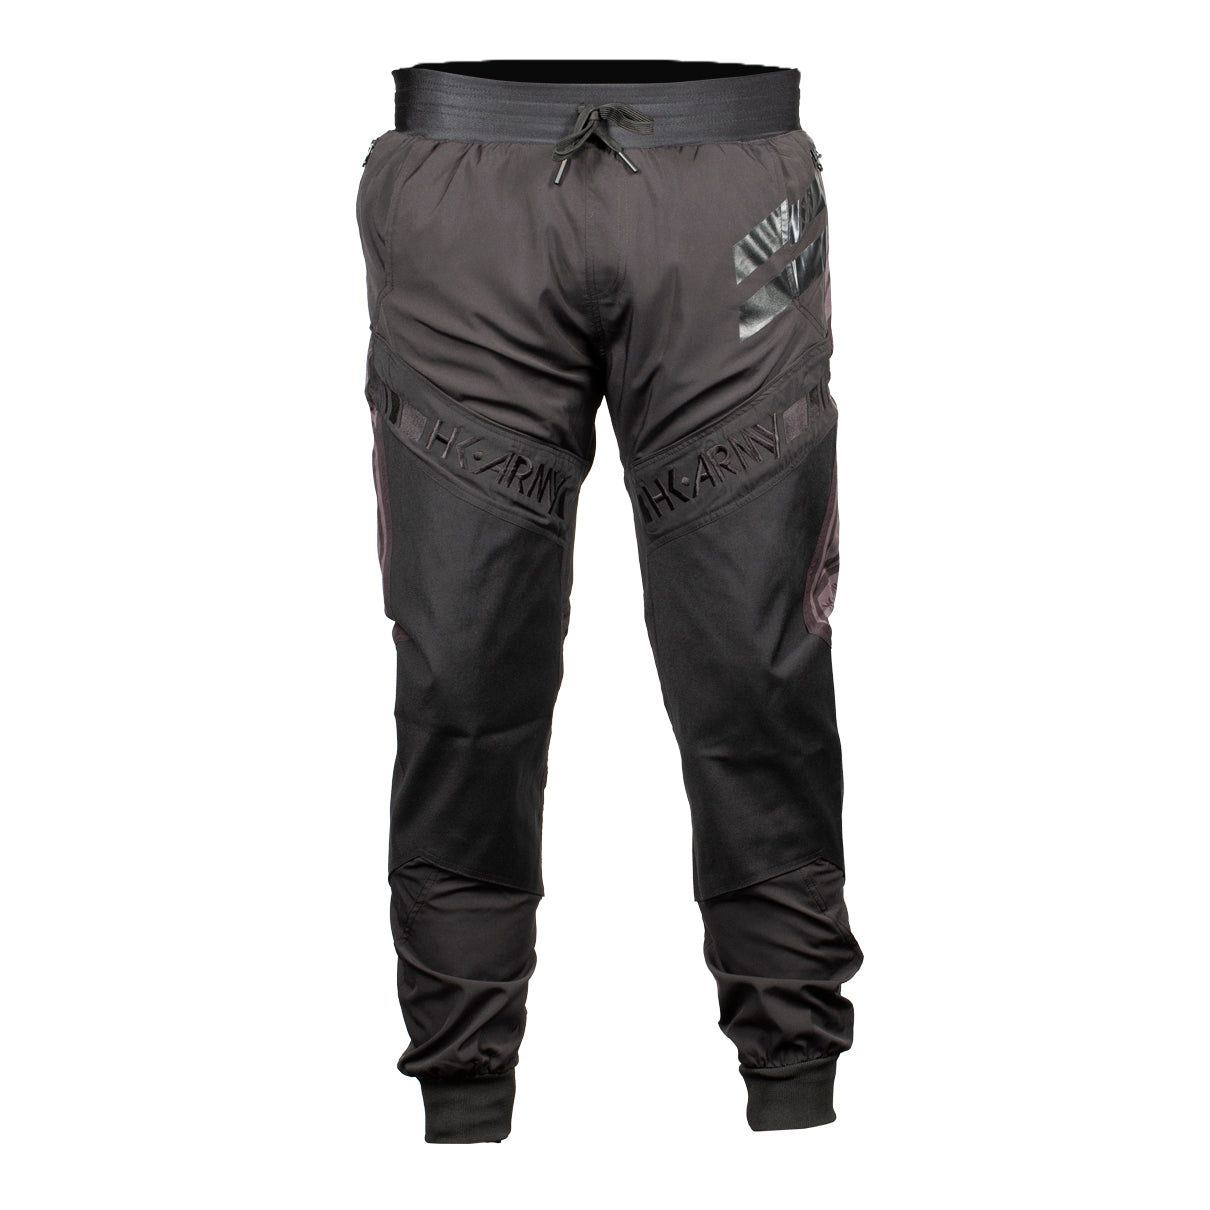 HK Army Trk Air Paintball Pant Joggers Blackout X-Large